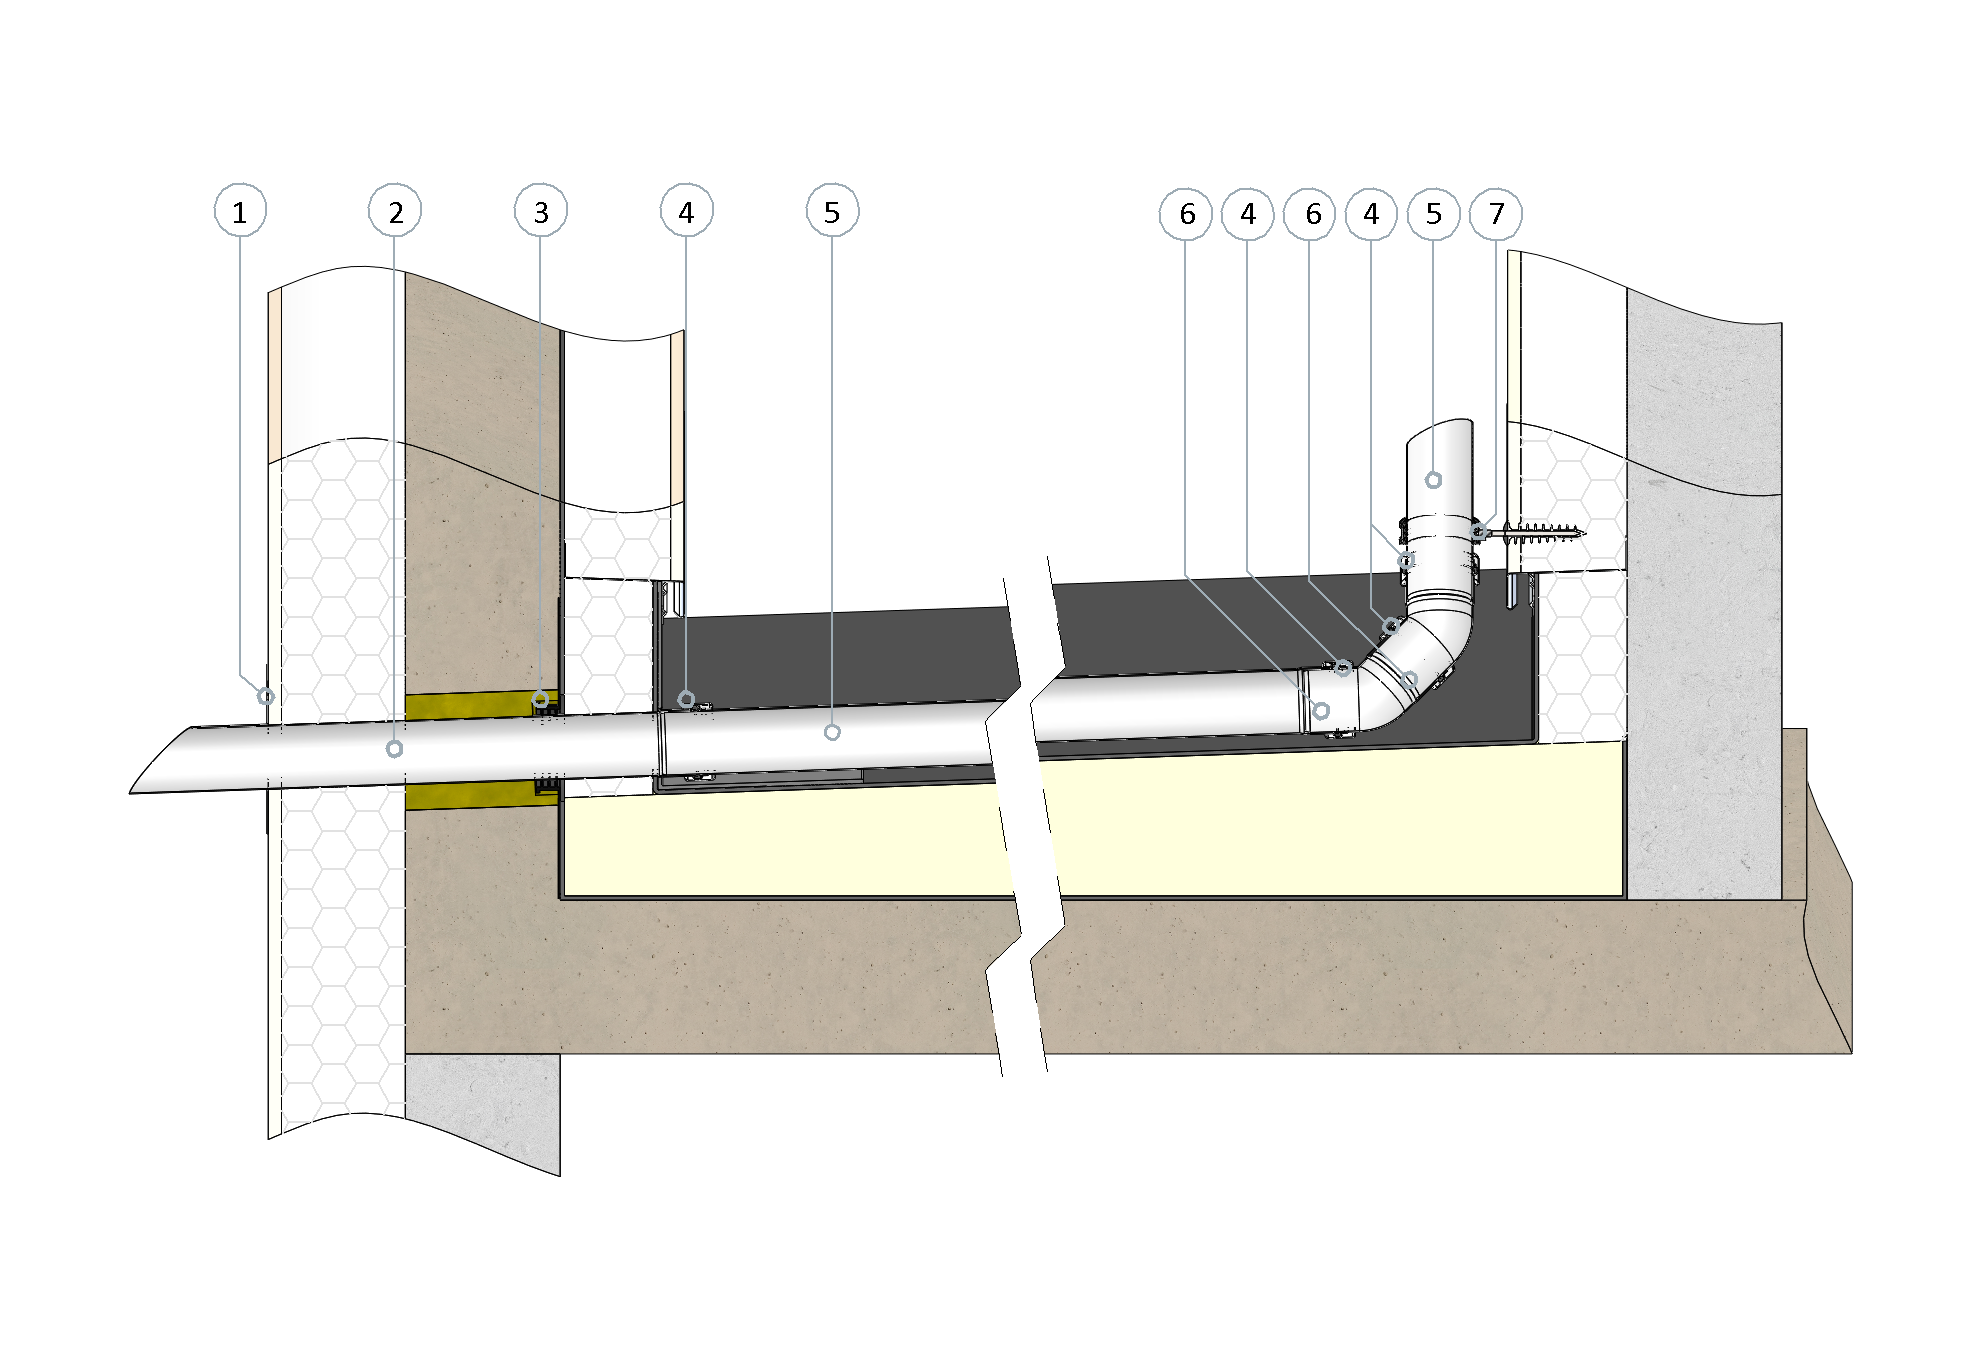 SitaKaskade lead-through Fluid angled as waterspout for emergency drainage in a non-ventilated roof structure